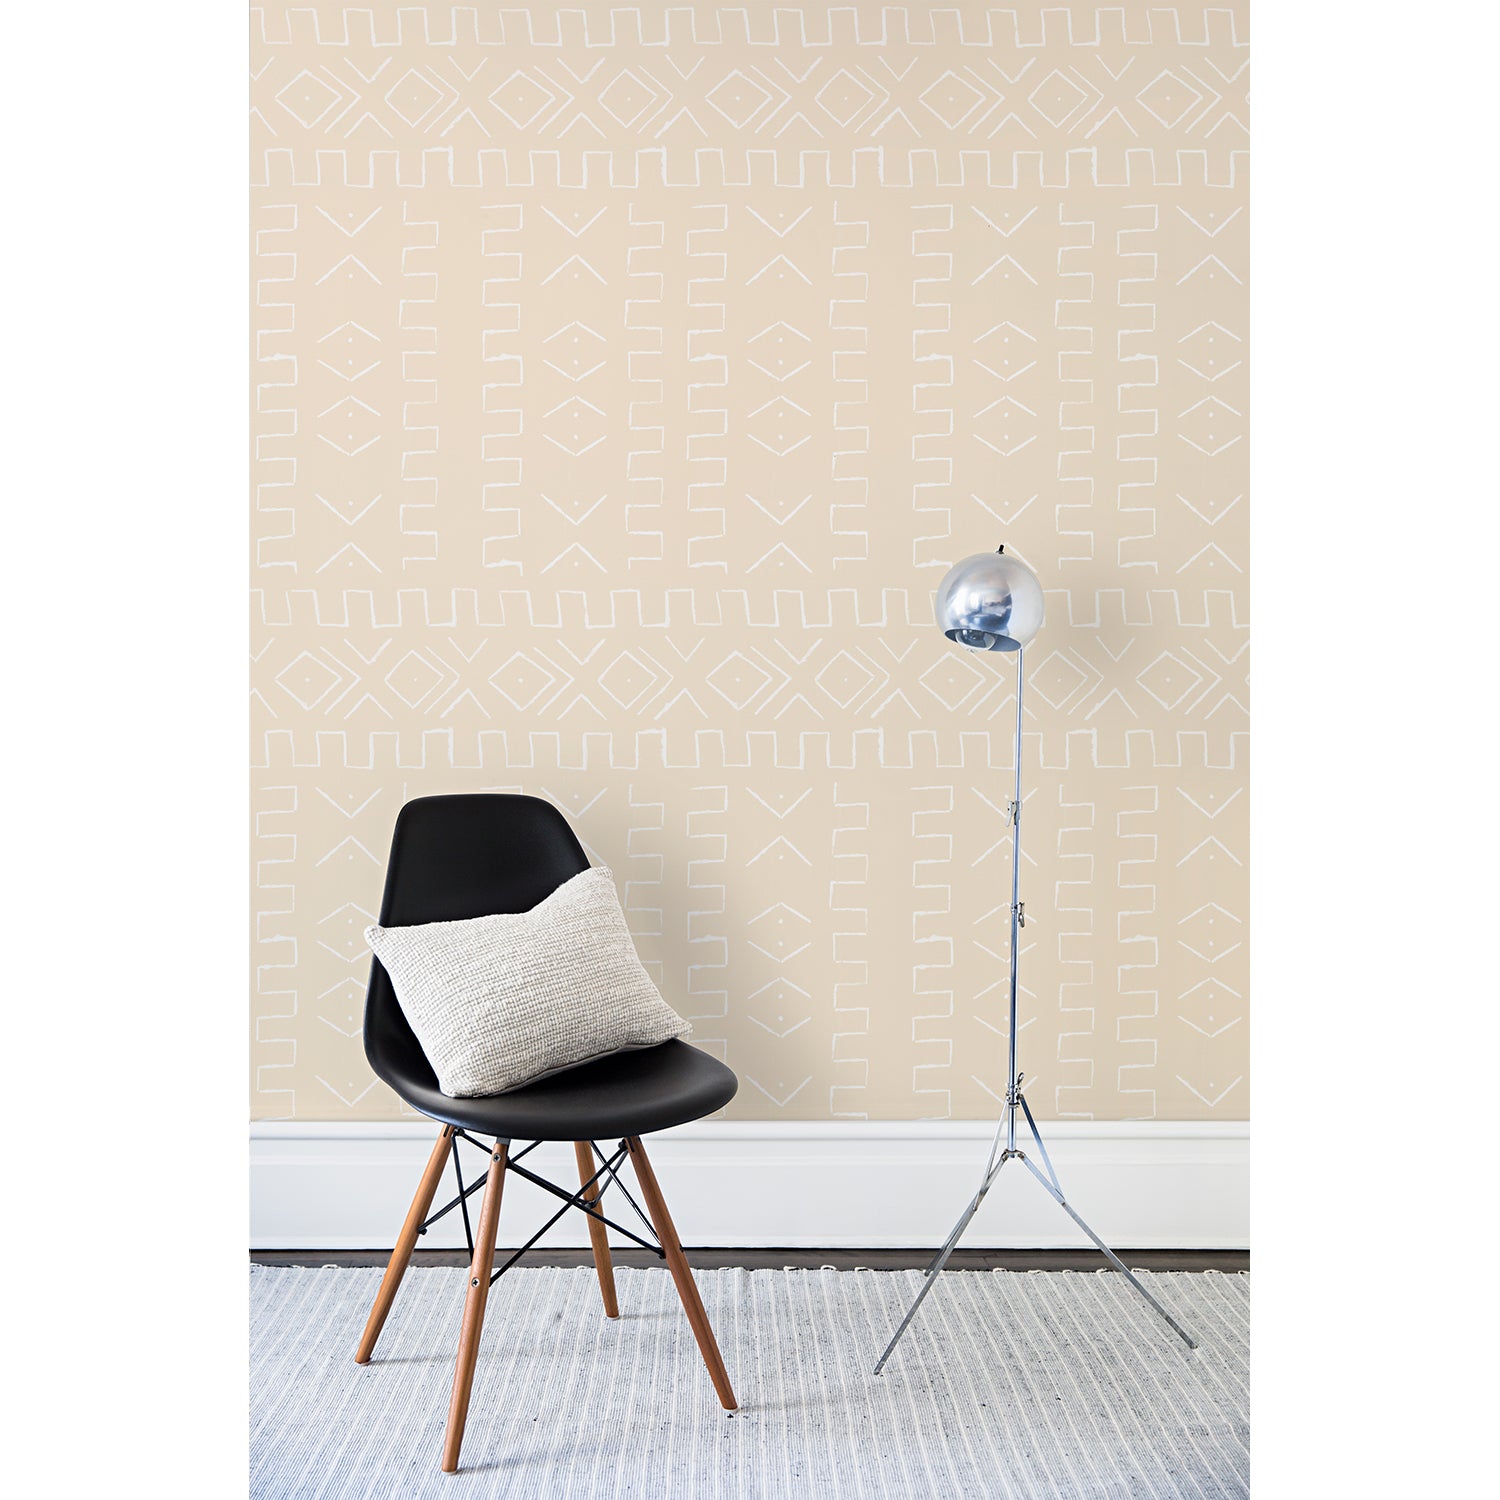 A chair and floor lamp in front of a wall papered in a minimalist African-inspired line design of painted white on a beige background.